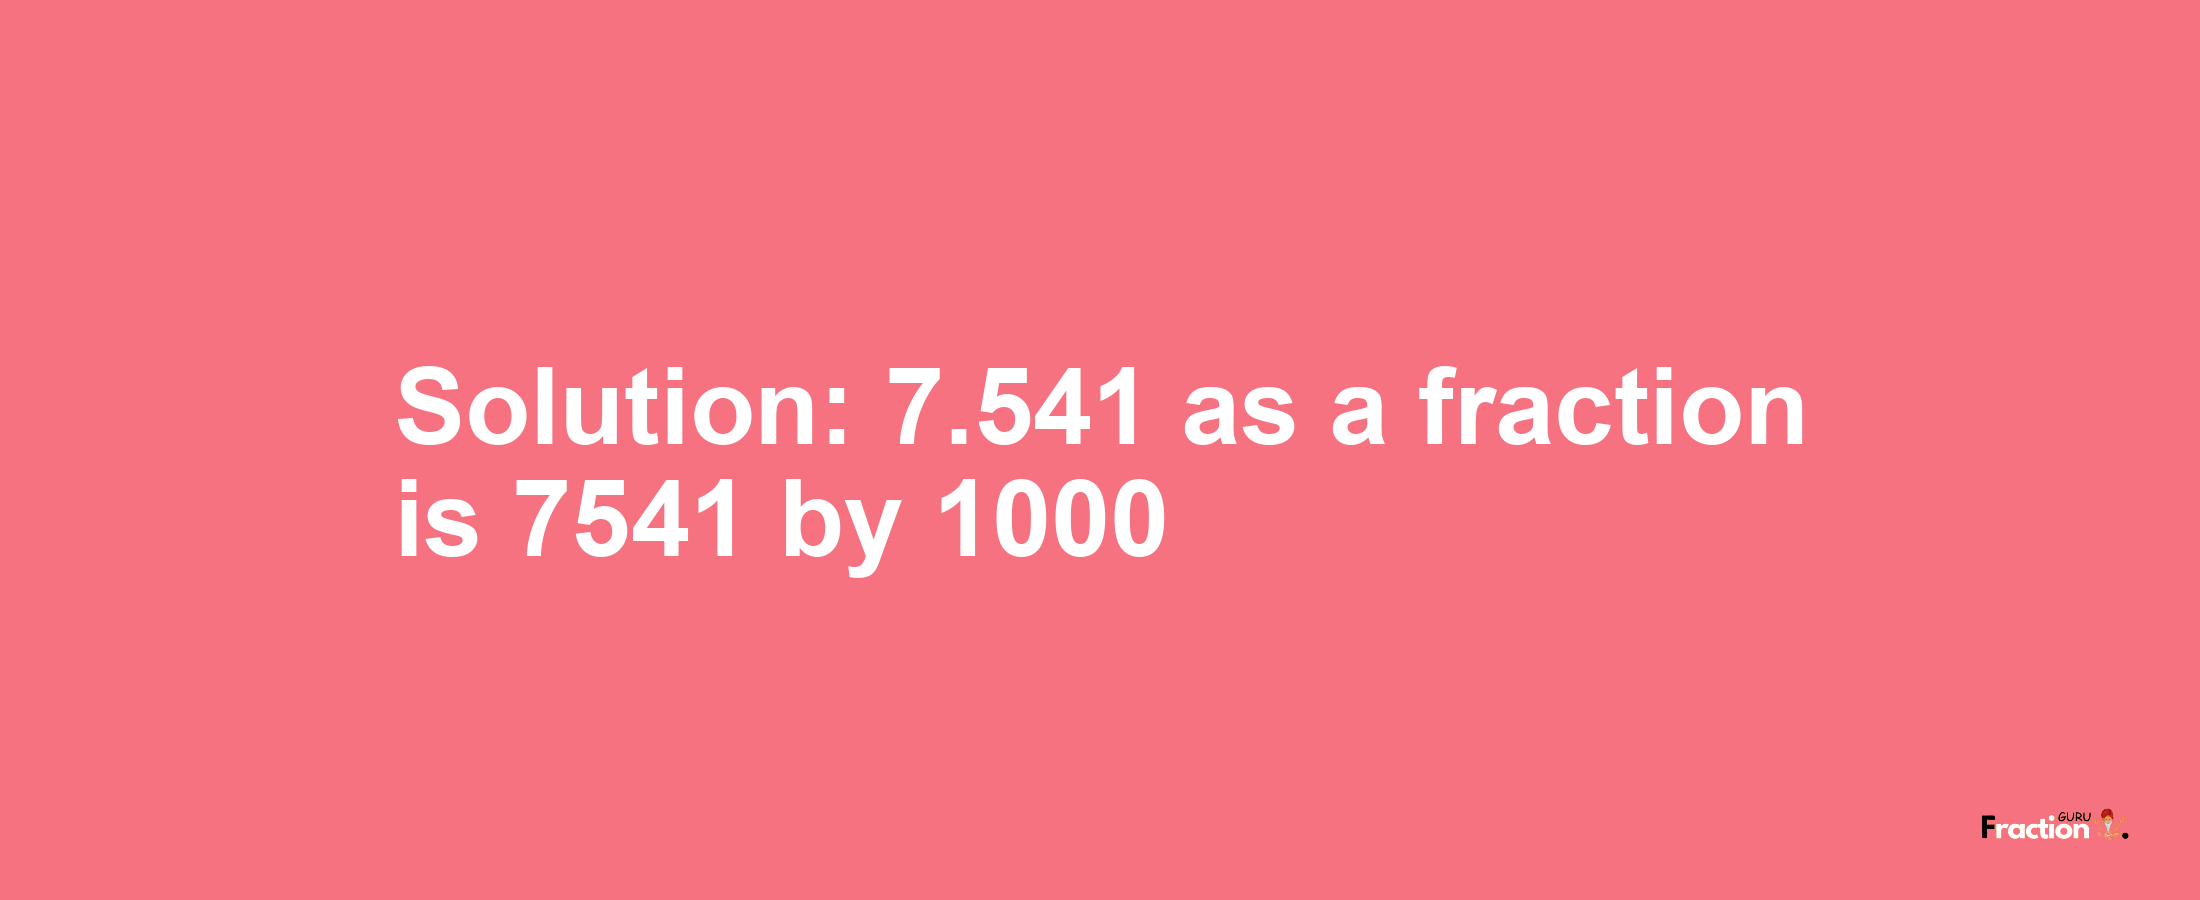 Solution:7.541 as a fraction is 7541/1000